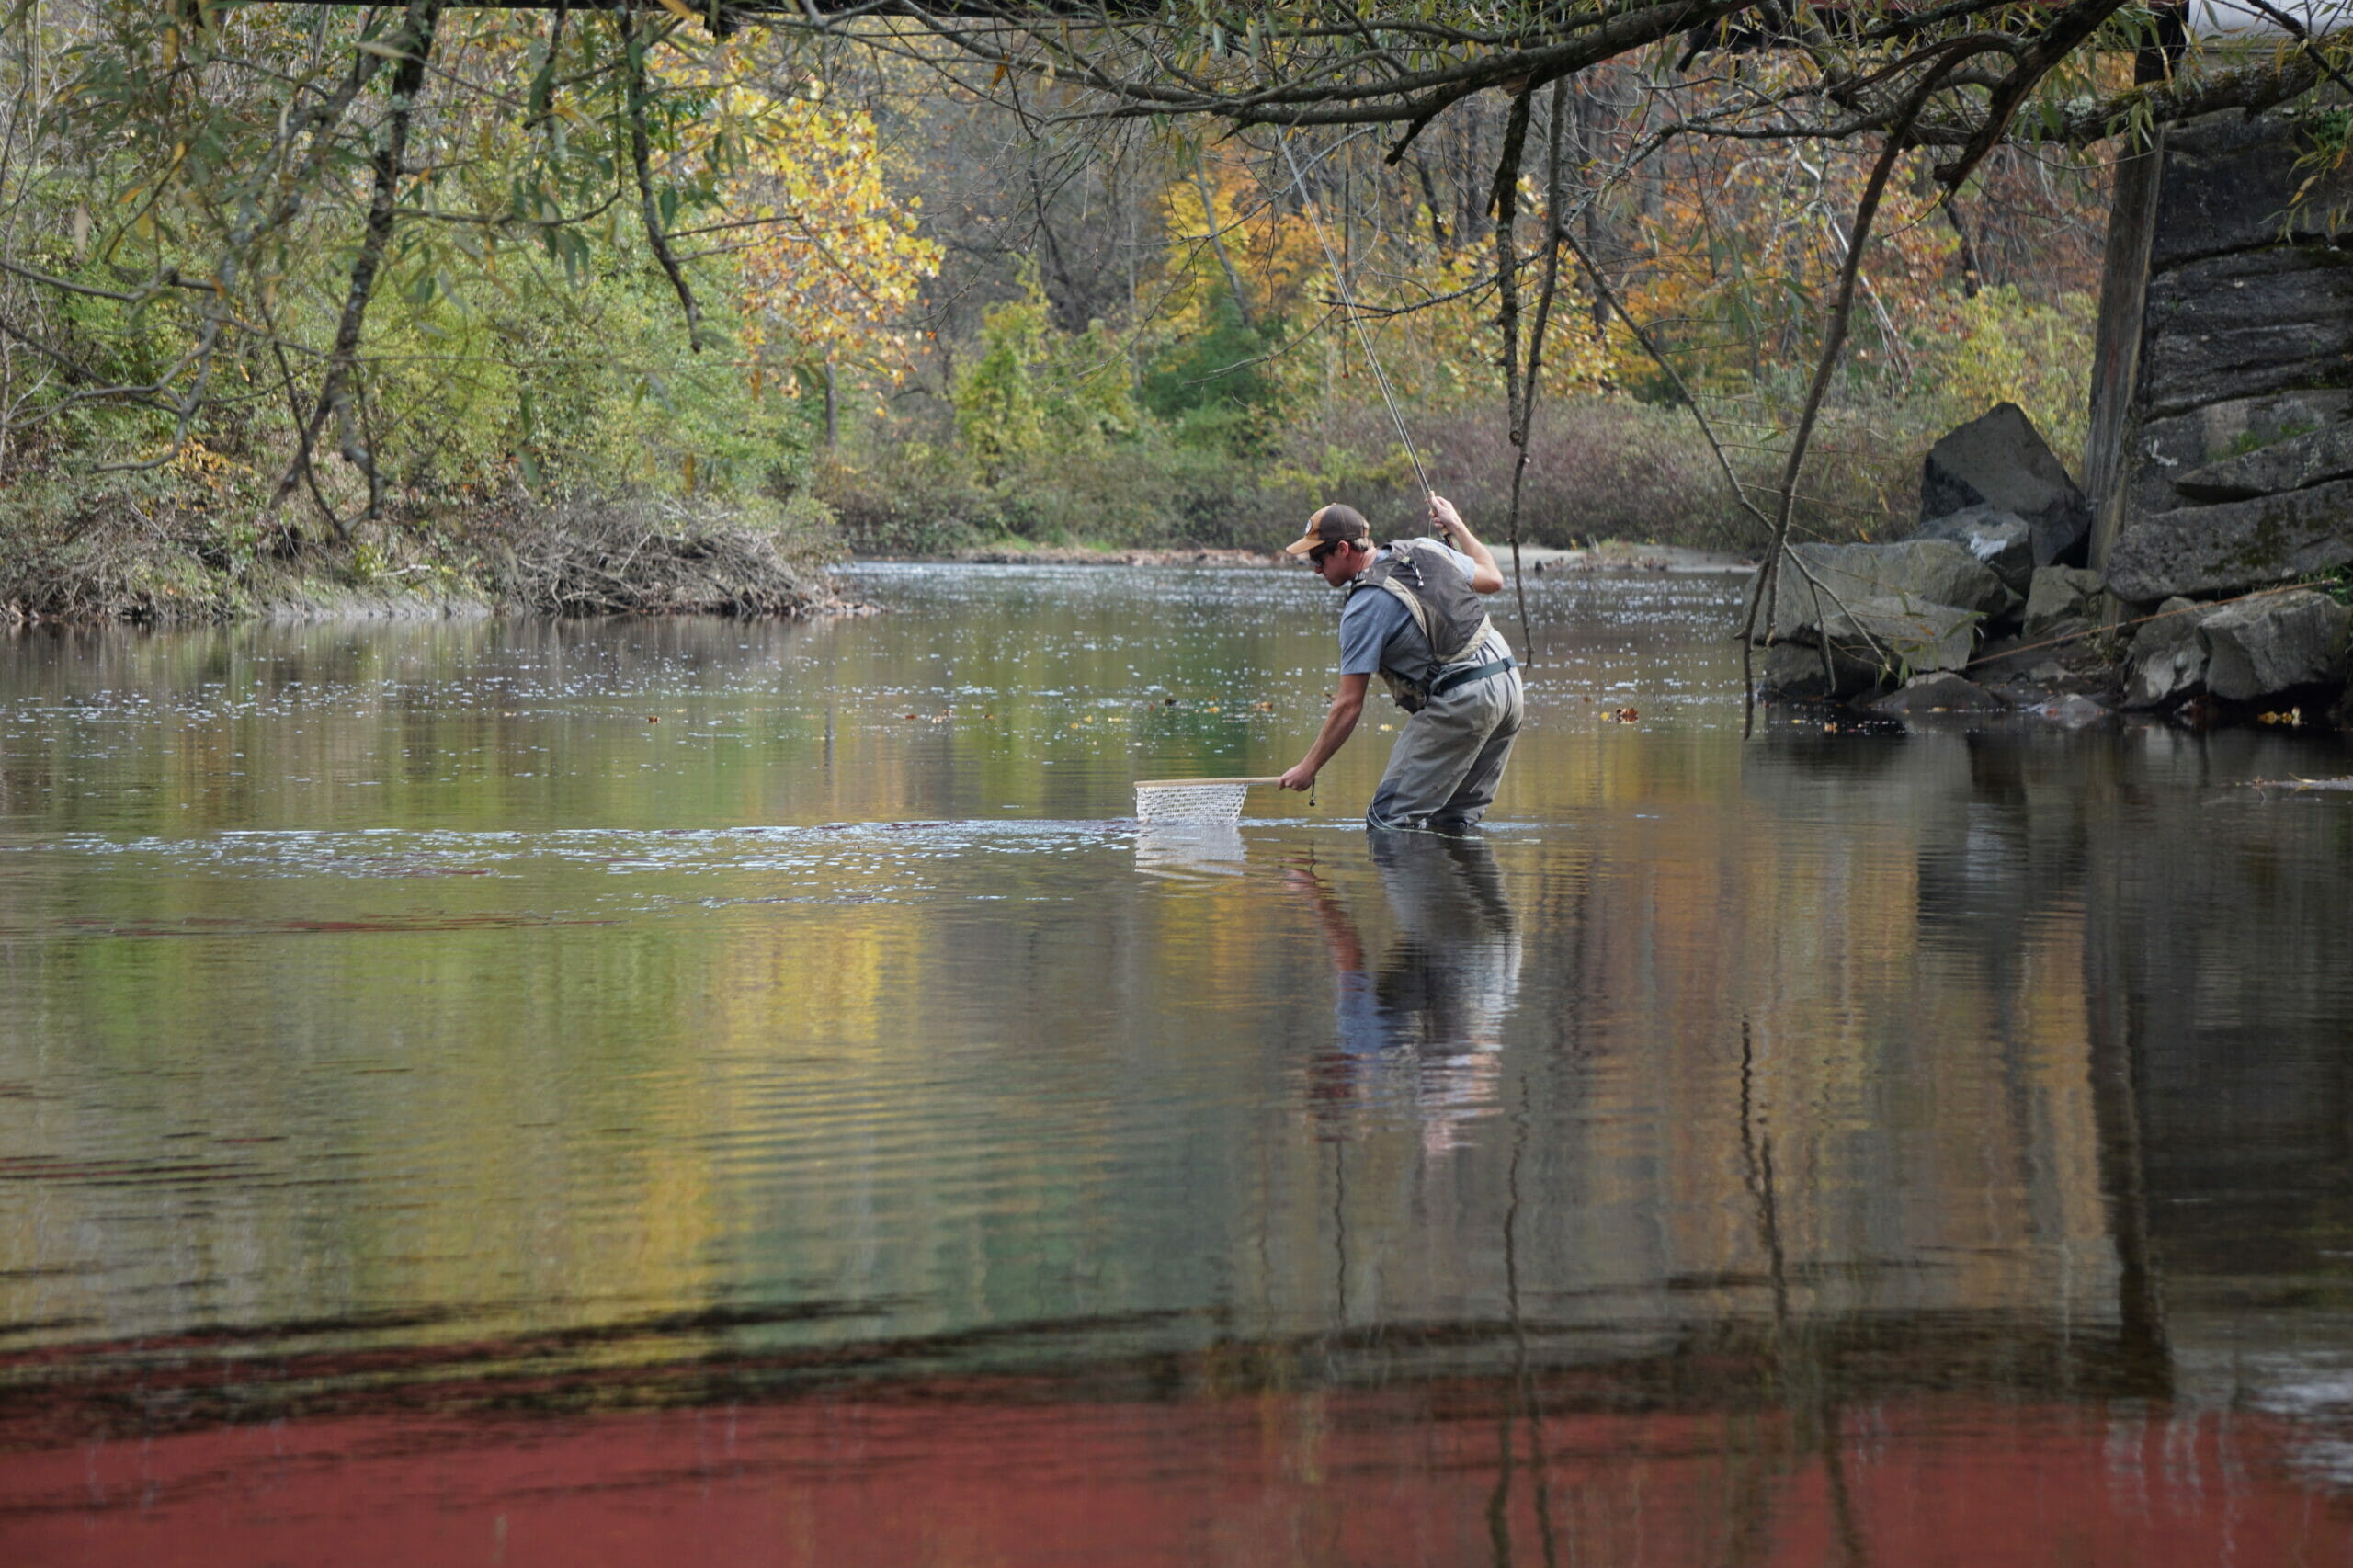 Orvis Backs Battenkill Home Rivers Initiative - Trout Unlimited